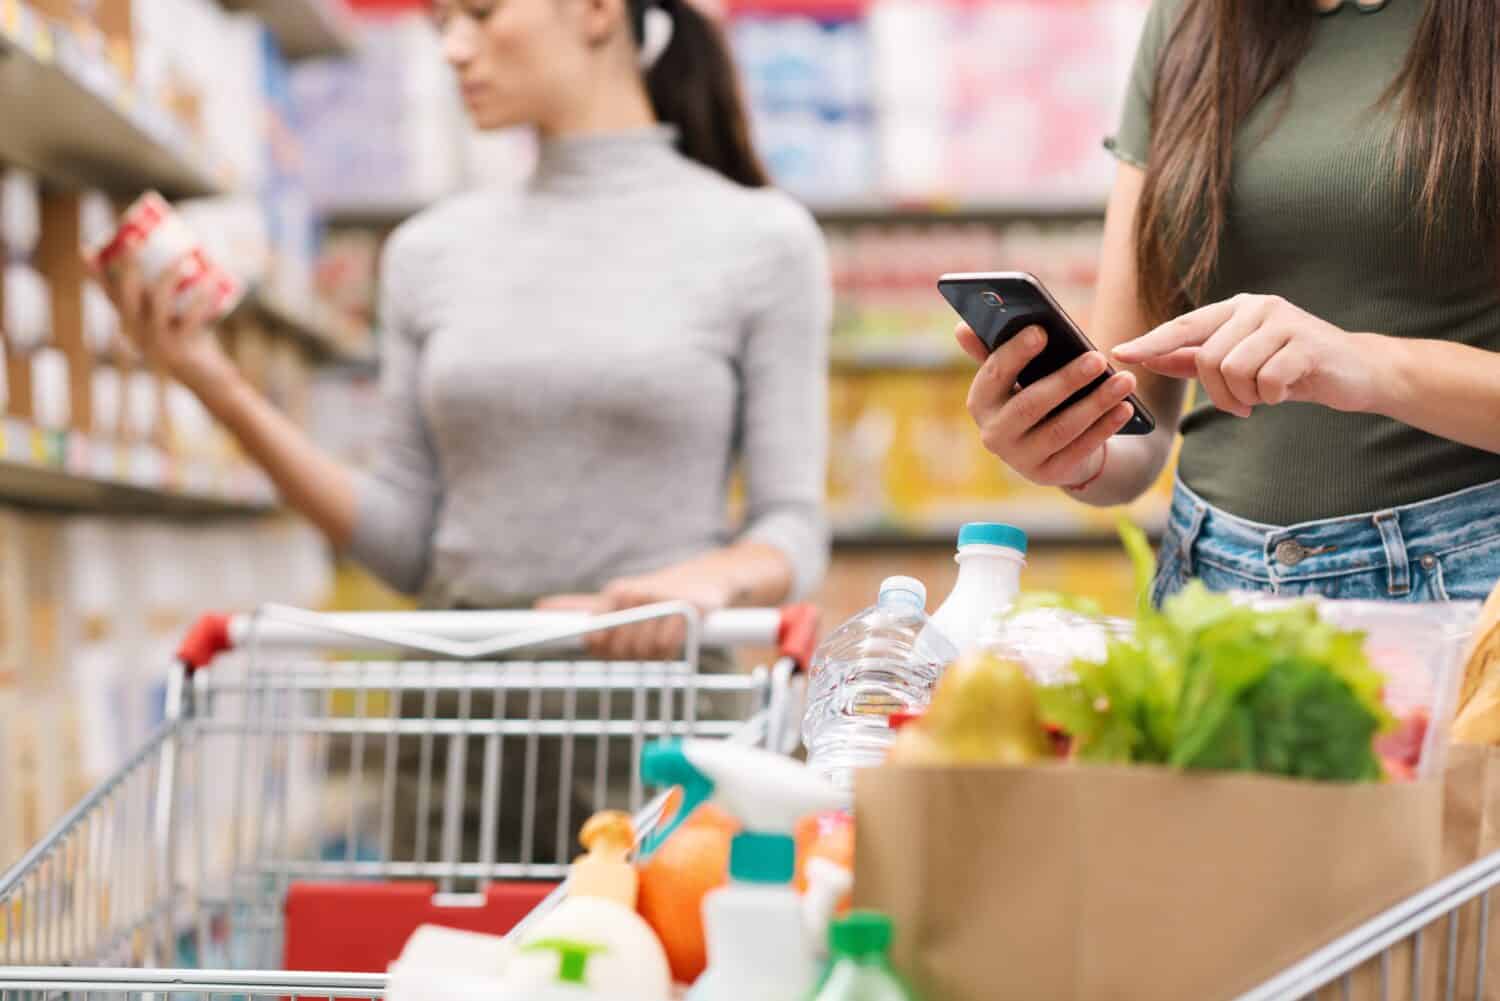 Women doing grocery shopping together at the supermarket, one is using her smartphone in the foreground